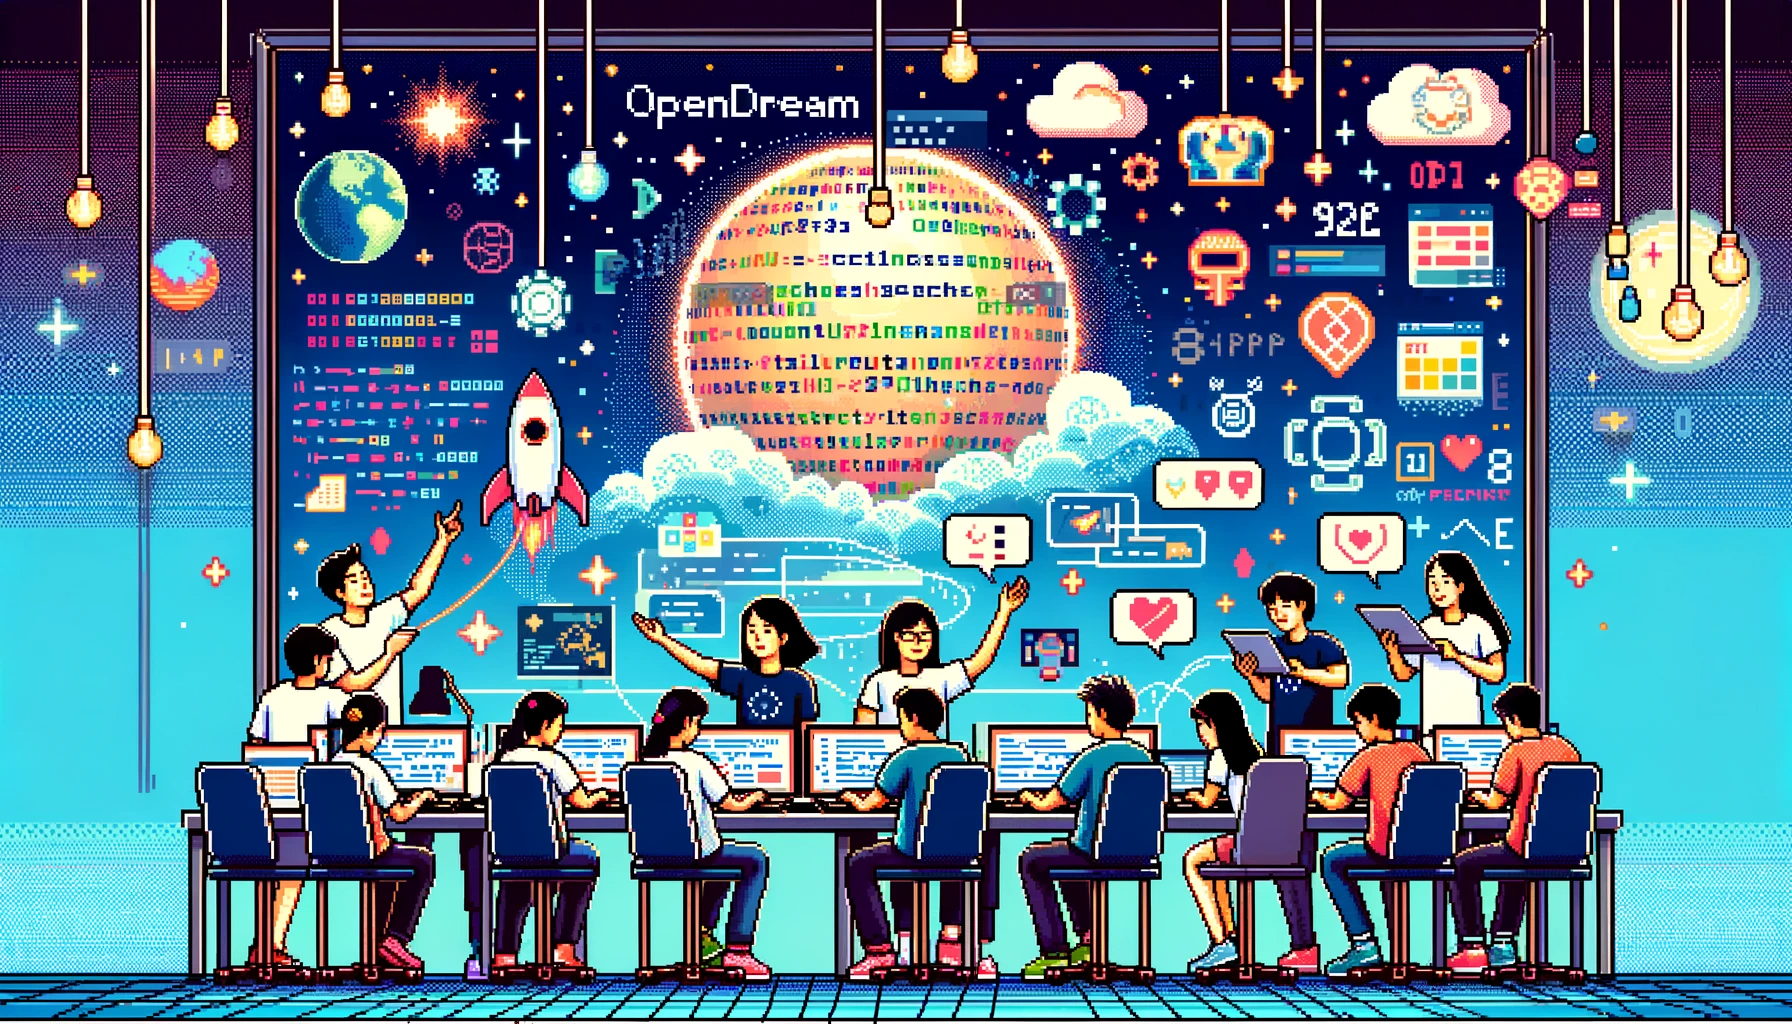 A 16:9 horizontal 8-bit graphic depicting Asian men and women software engineers working for Opendream. The scene shows them coding for social impact, with elements that reflect their work such as digital code patterns, social media icons, and community engagement symbols, all within an 8-bit design aesthetic. The background is inspired by space exploration, suggesting innovation and reaching new frontiers, with pixelated stars and planets. The engineers are portrayed in a way that shows diversity and dedication, as they collaborate on projects that drive social change, rendered in vibrant 8-bit graphics.